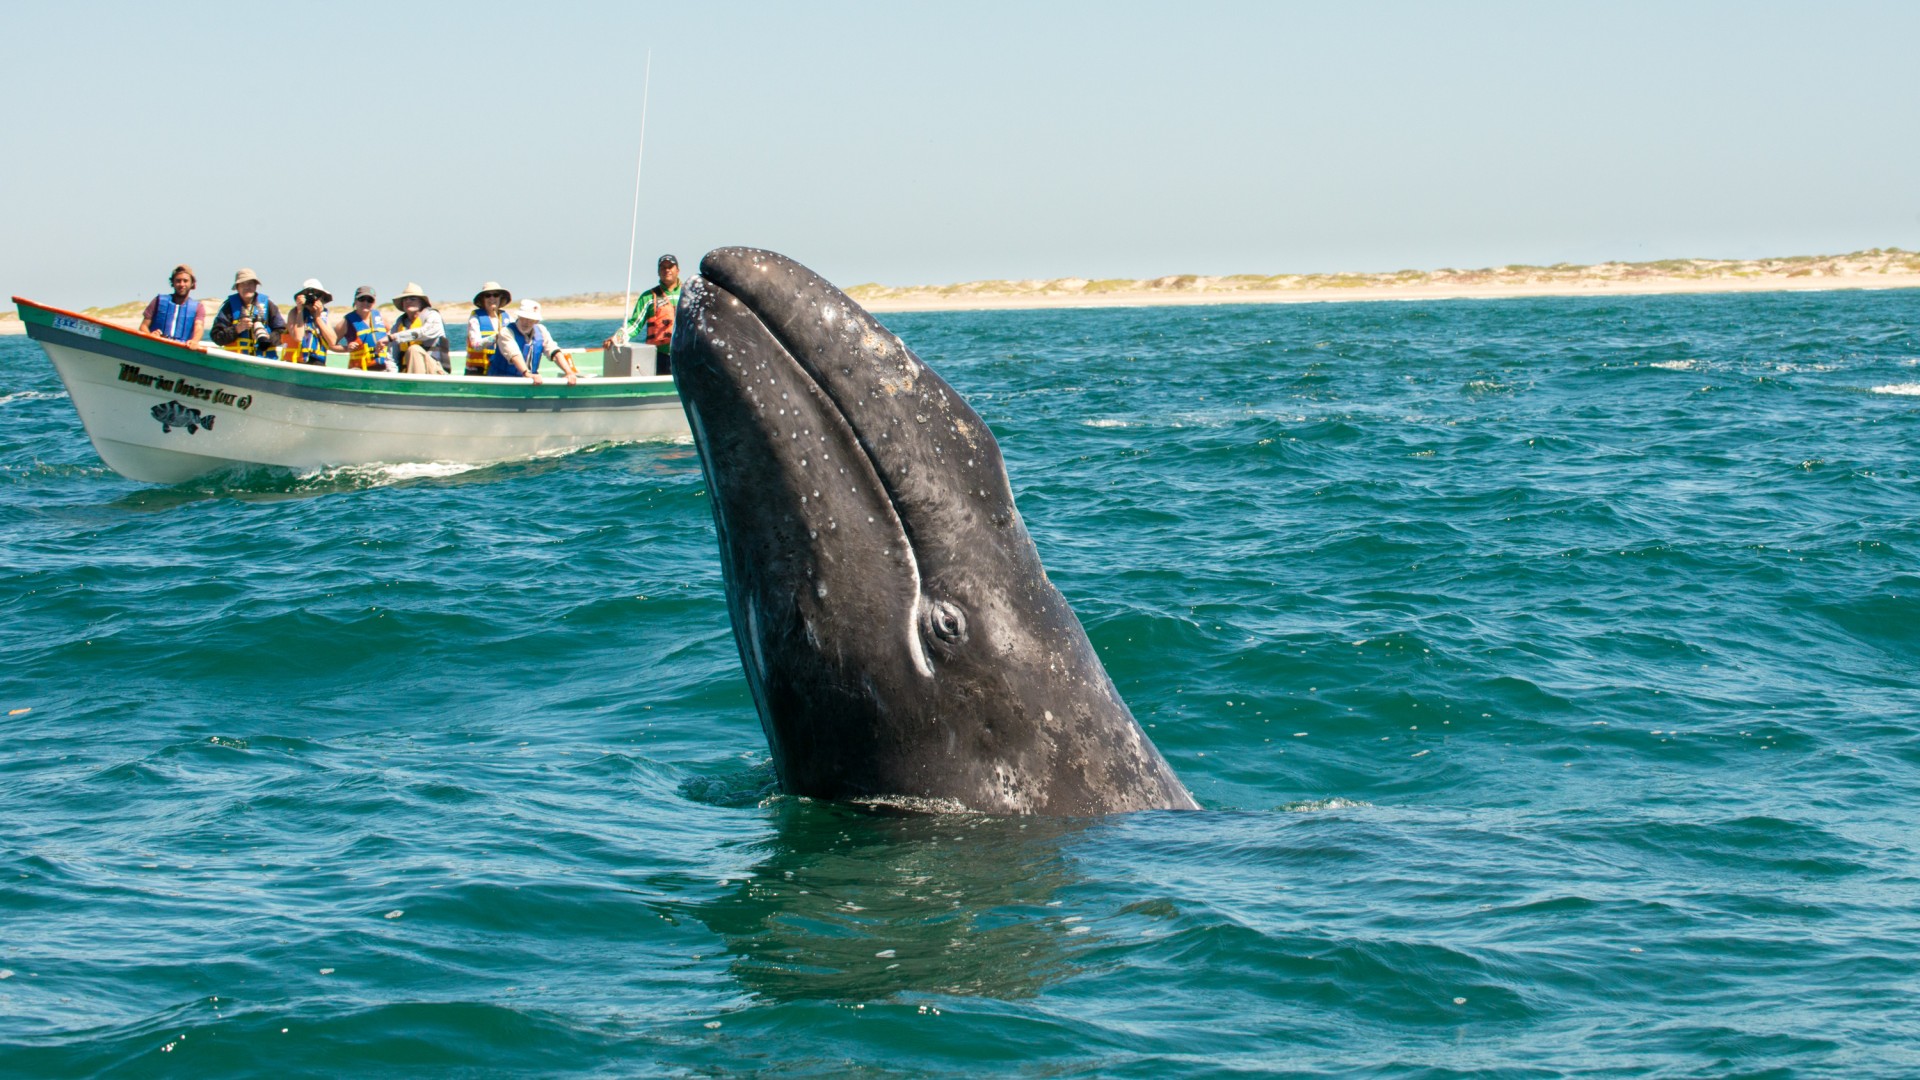 Gray whale breached out of the Pacific Ocean on a sunny day